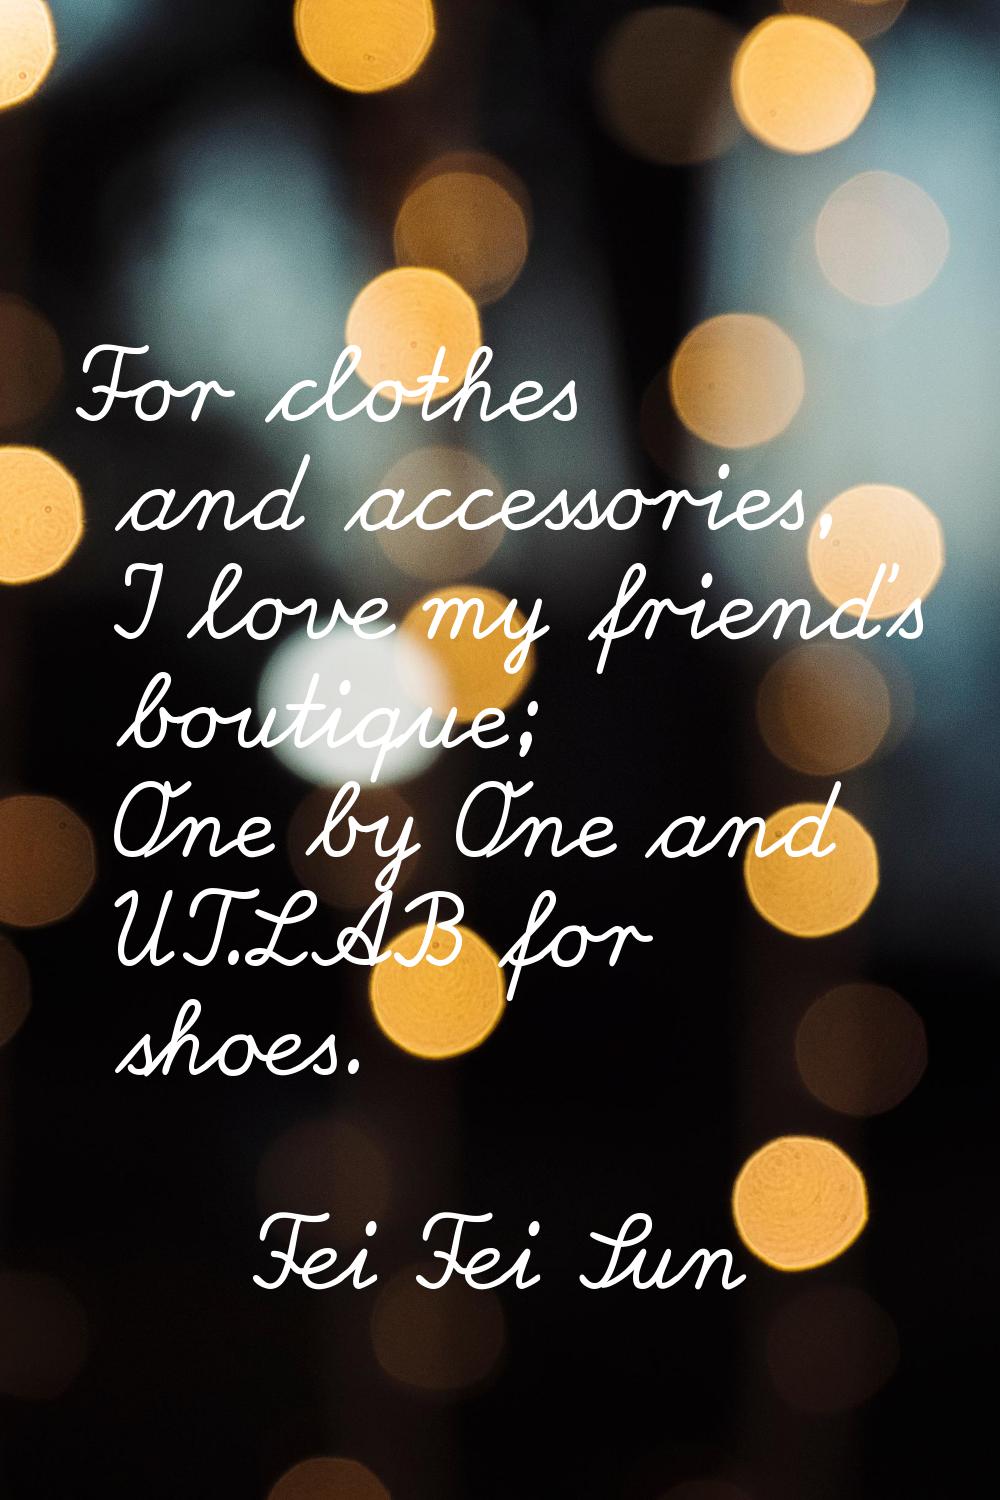 For clothes and accessories, I love my friend's boutique; One by One and UT.LAB for shoes.